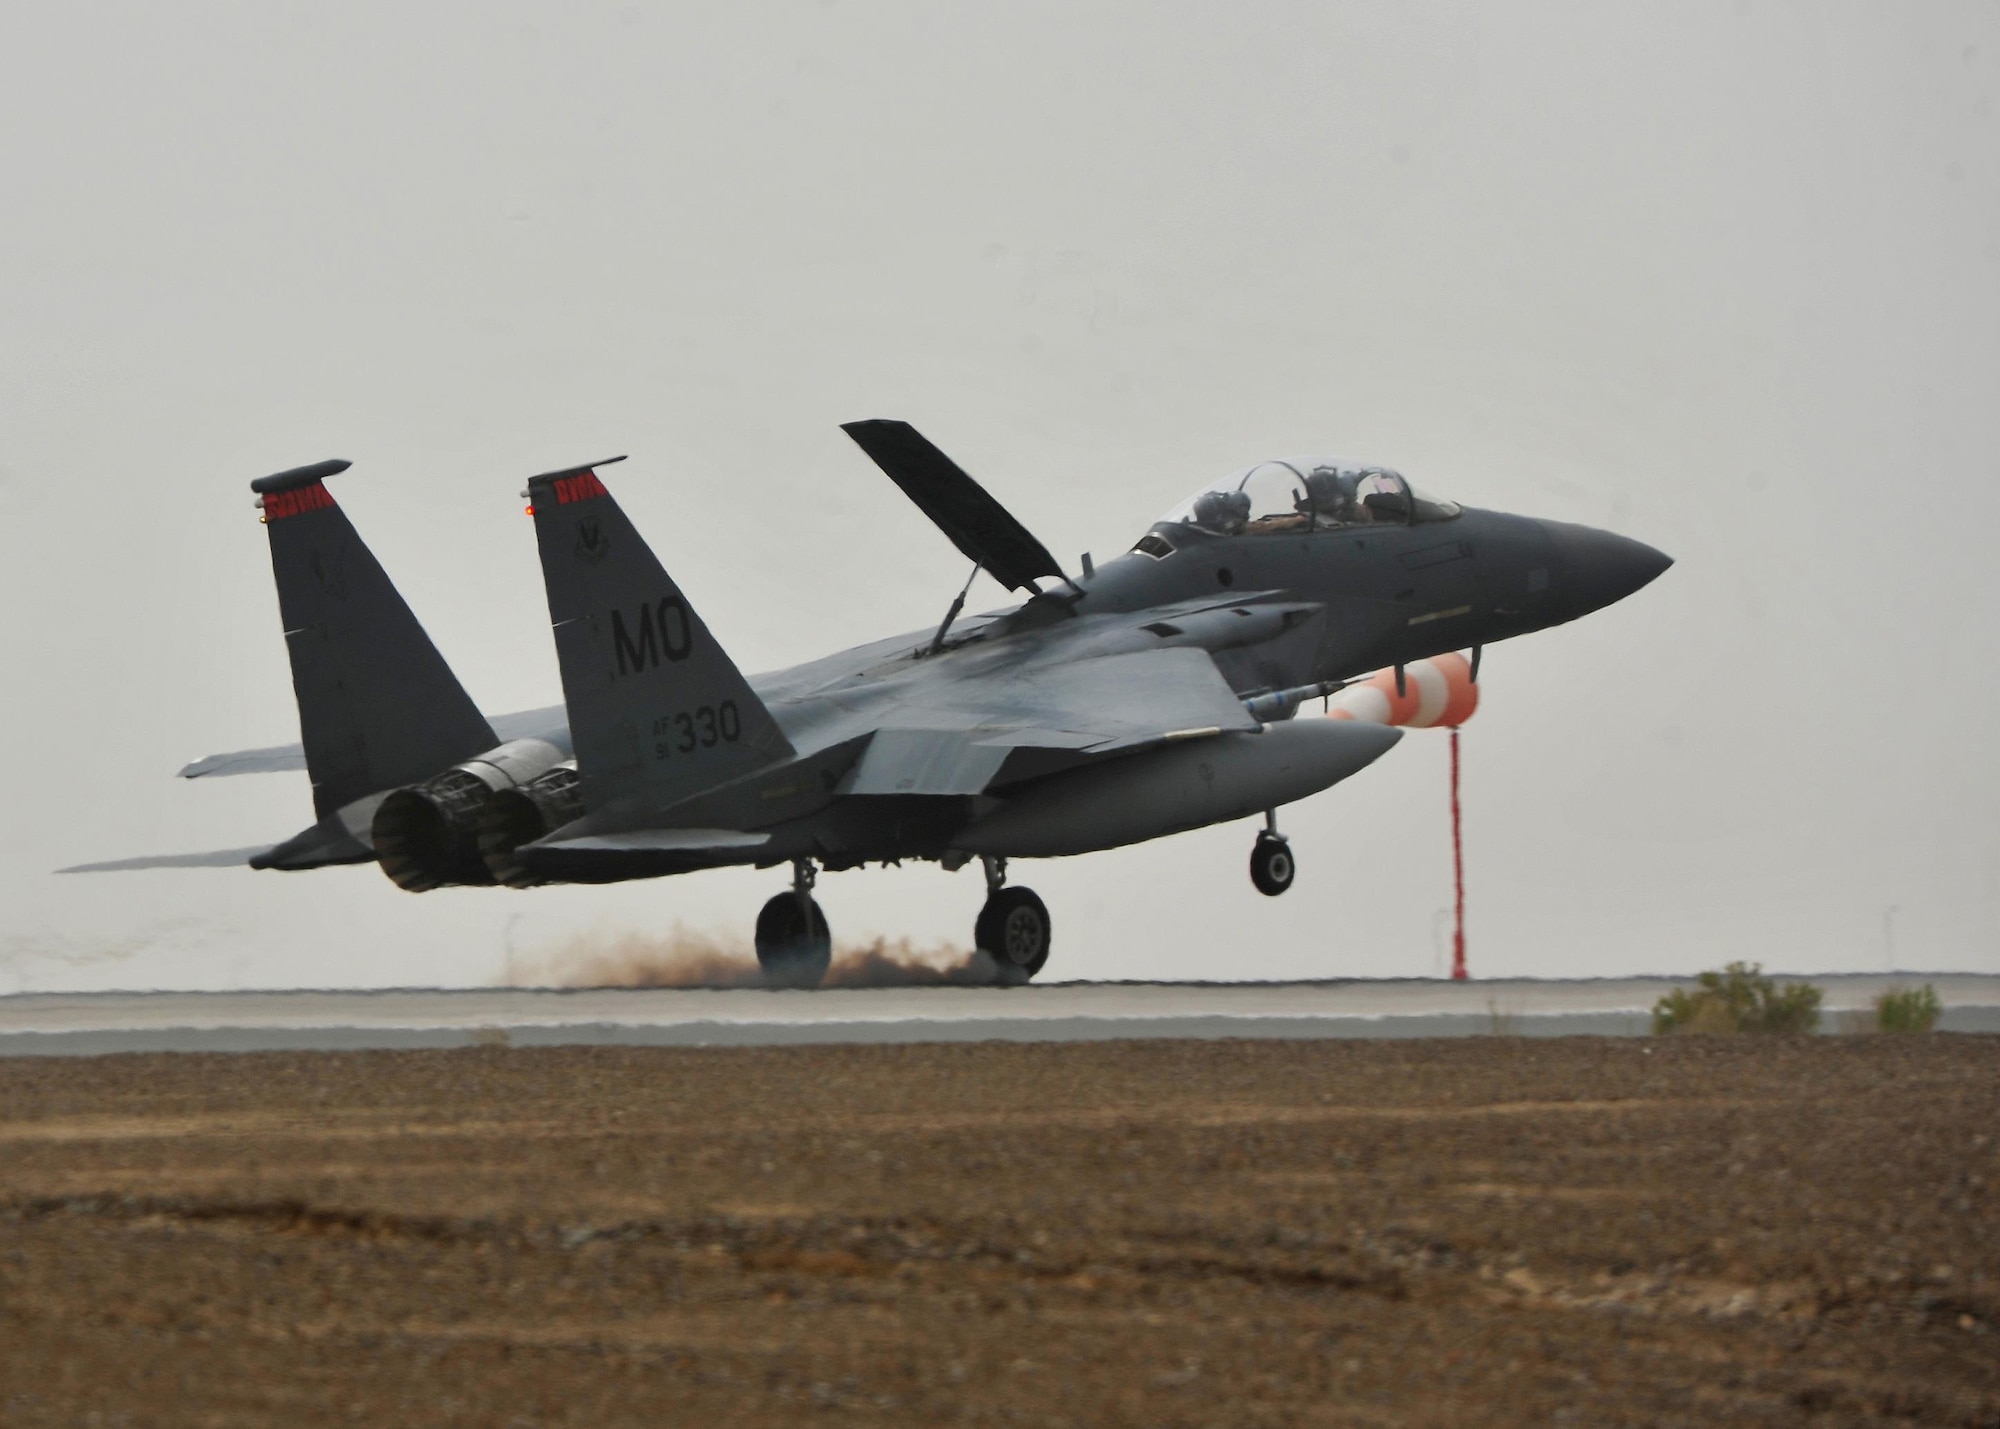 An F-15E Strike Eagle aircraft touches down during Exercise Desert Flag March 30, 2016, at an undisclosed location in Southwest Asia. When pilots weren’t flying sorties during the exercise, they were planning with their crews and coalition partners, discussing what capabilities everyone brought to the team before heading out for their next mission. (U.S. Air Force photo by Staff Sgt. Kentavist P. Brackin/released)